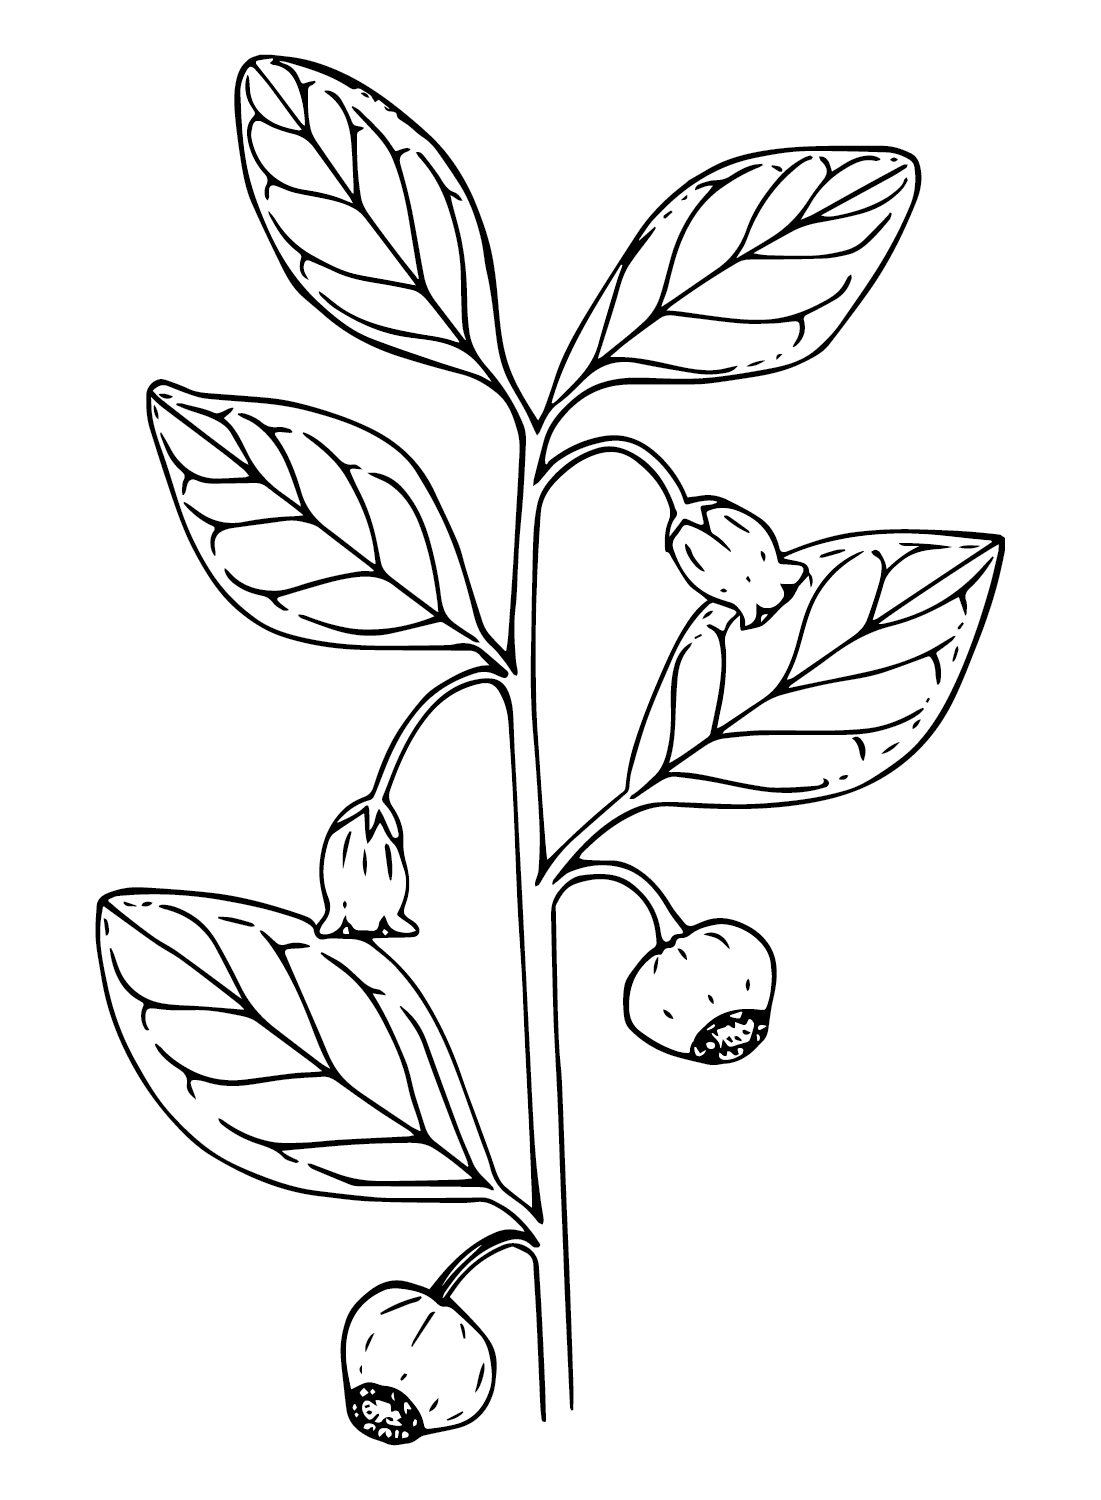 Huckleberry Tree Coloring Page